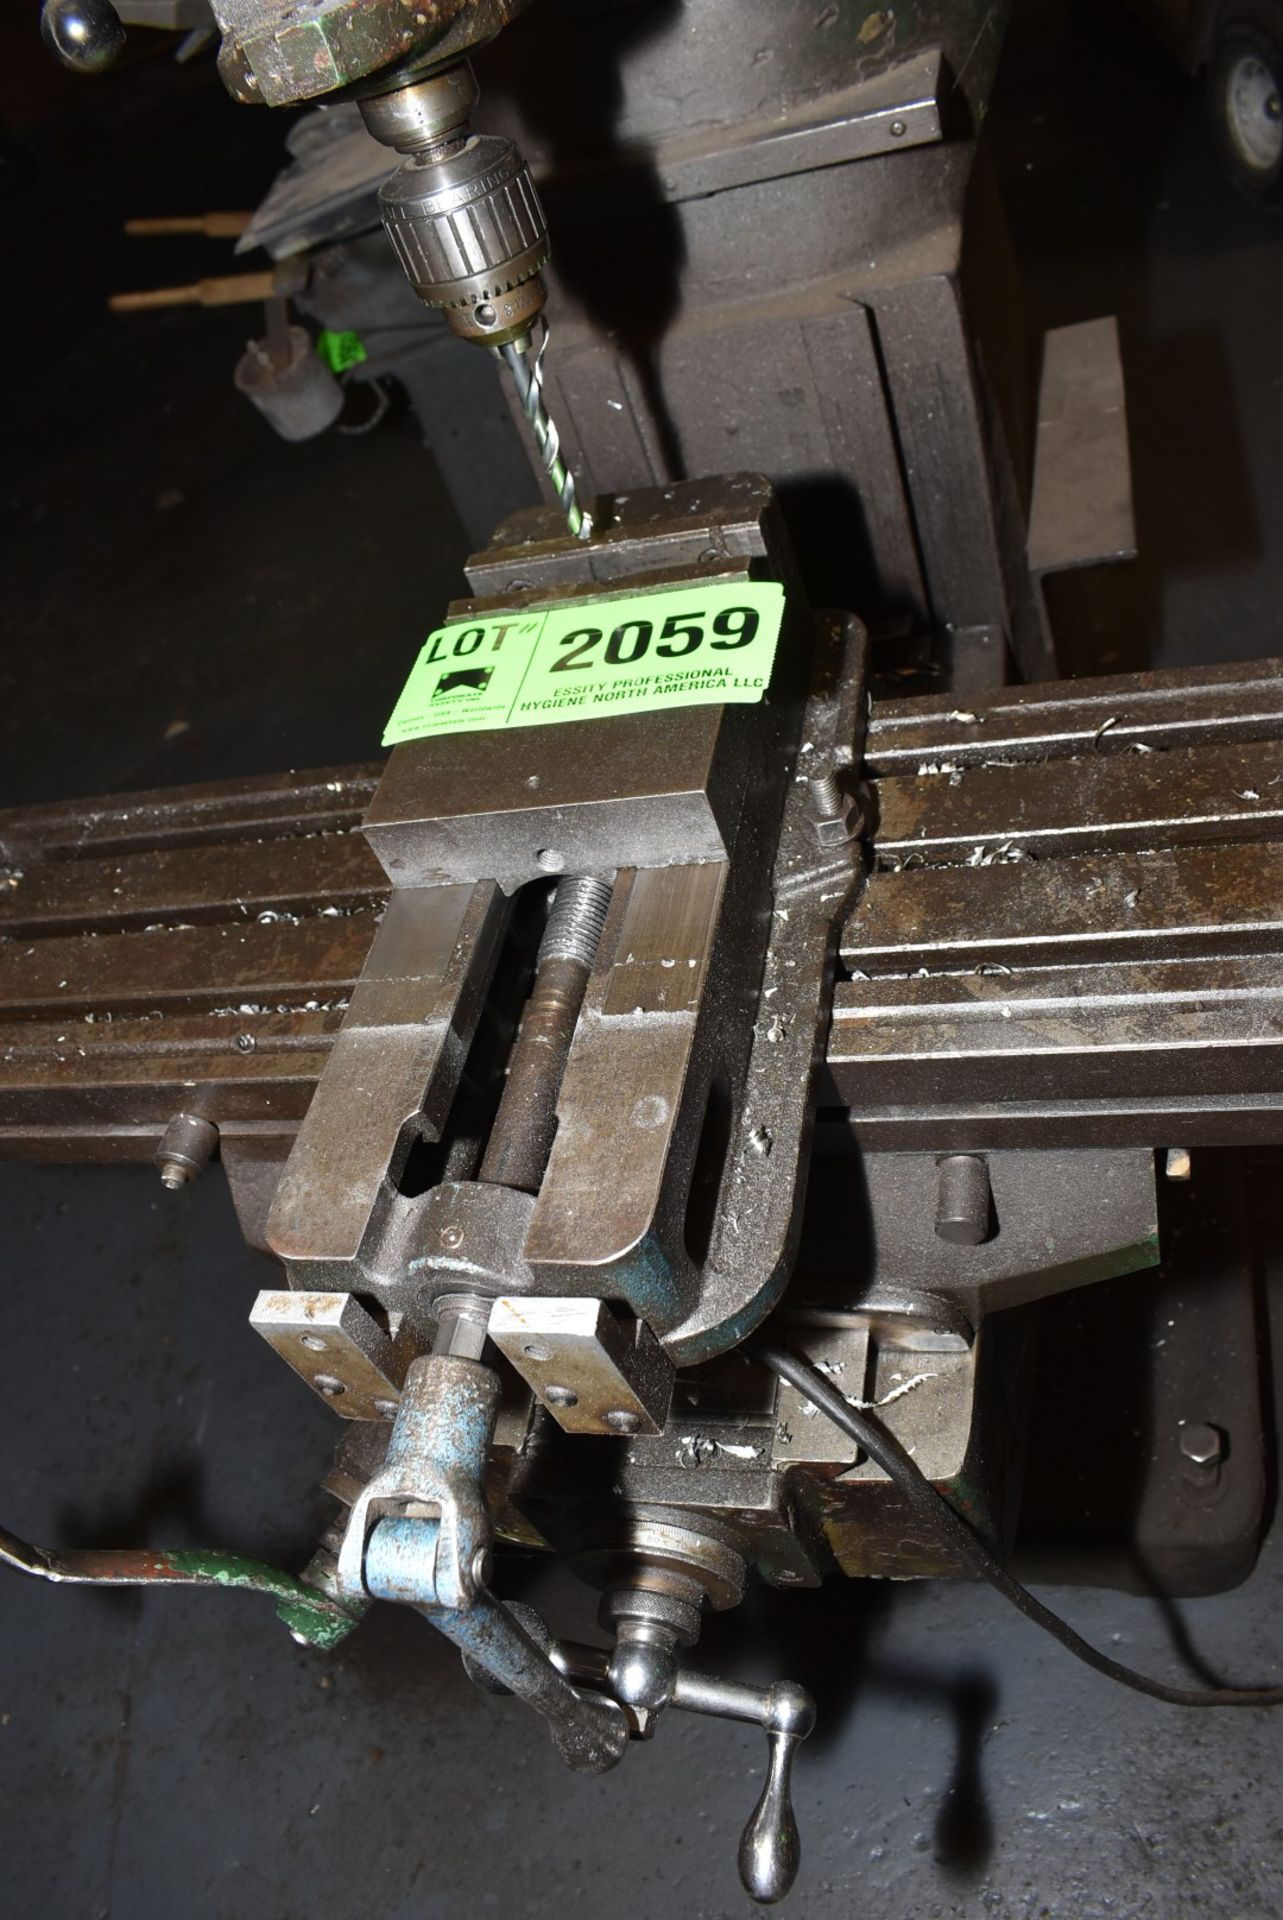 6" MACHINE VISE [RIGGING FEES FOR LOT #2059 - $25 USD PLUS APPLICABLE TAXES] - Image 2 of 2